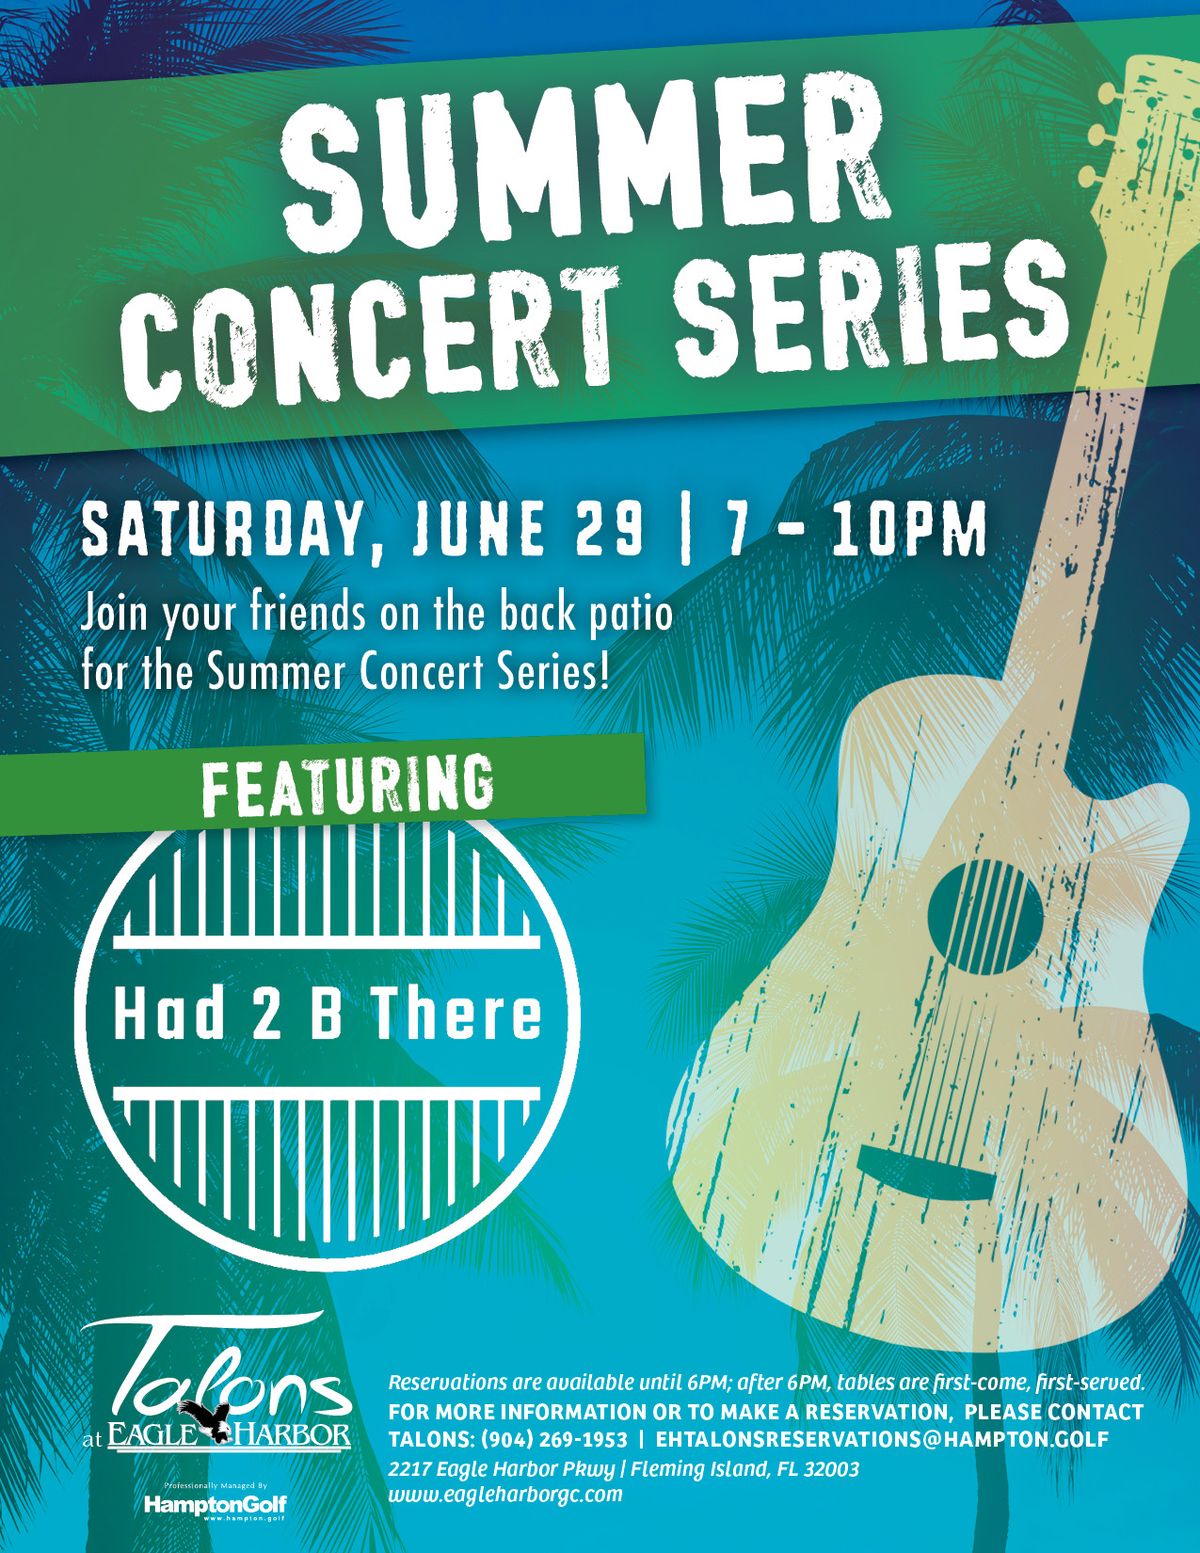 Summer Concert Series: Had 2 B There